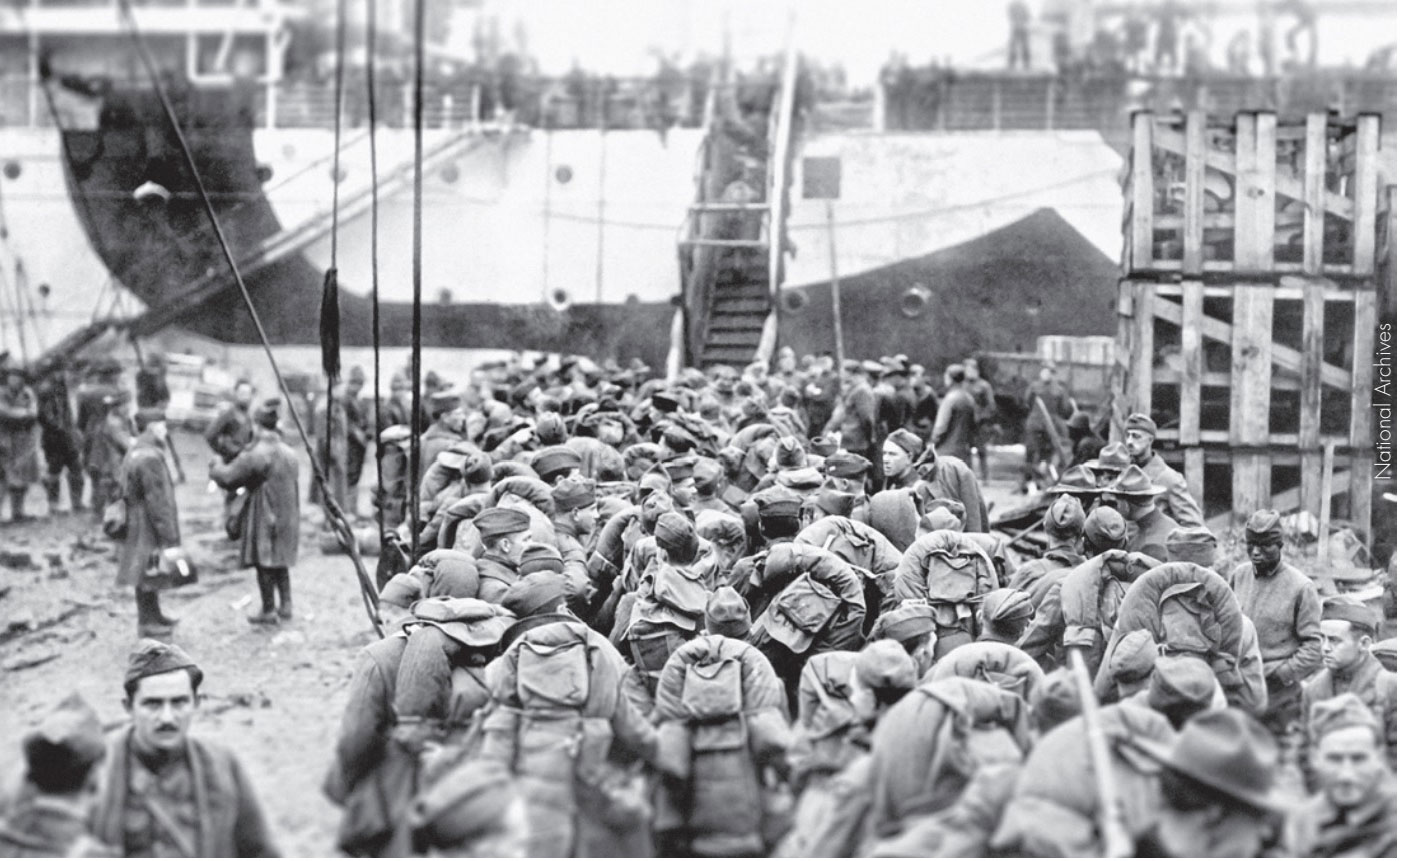 Troops waiting for their turn to board the ship home, c. 1919.